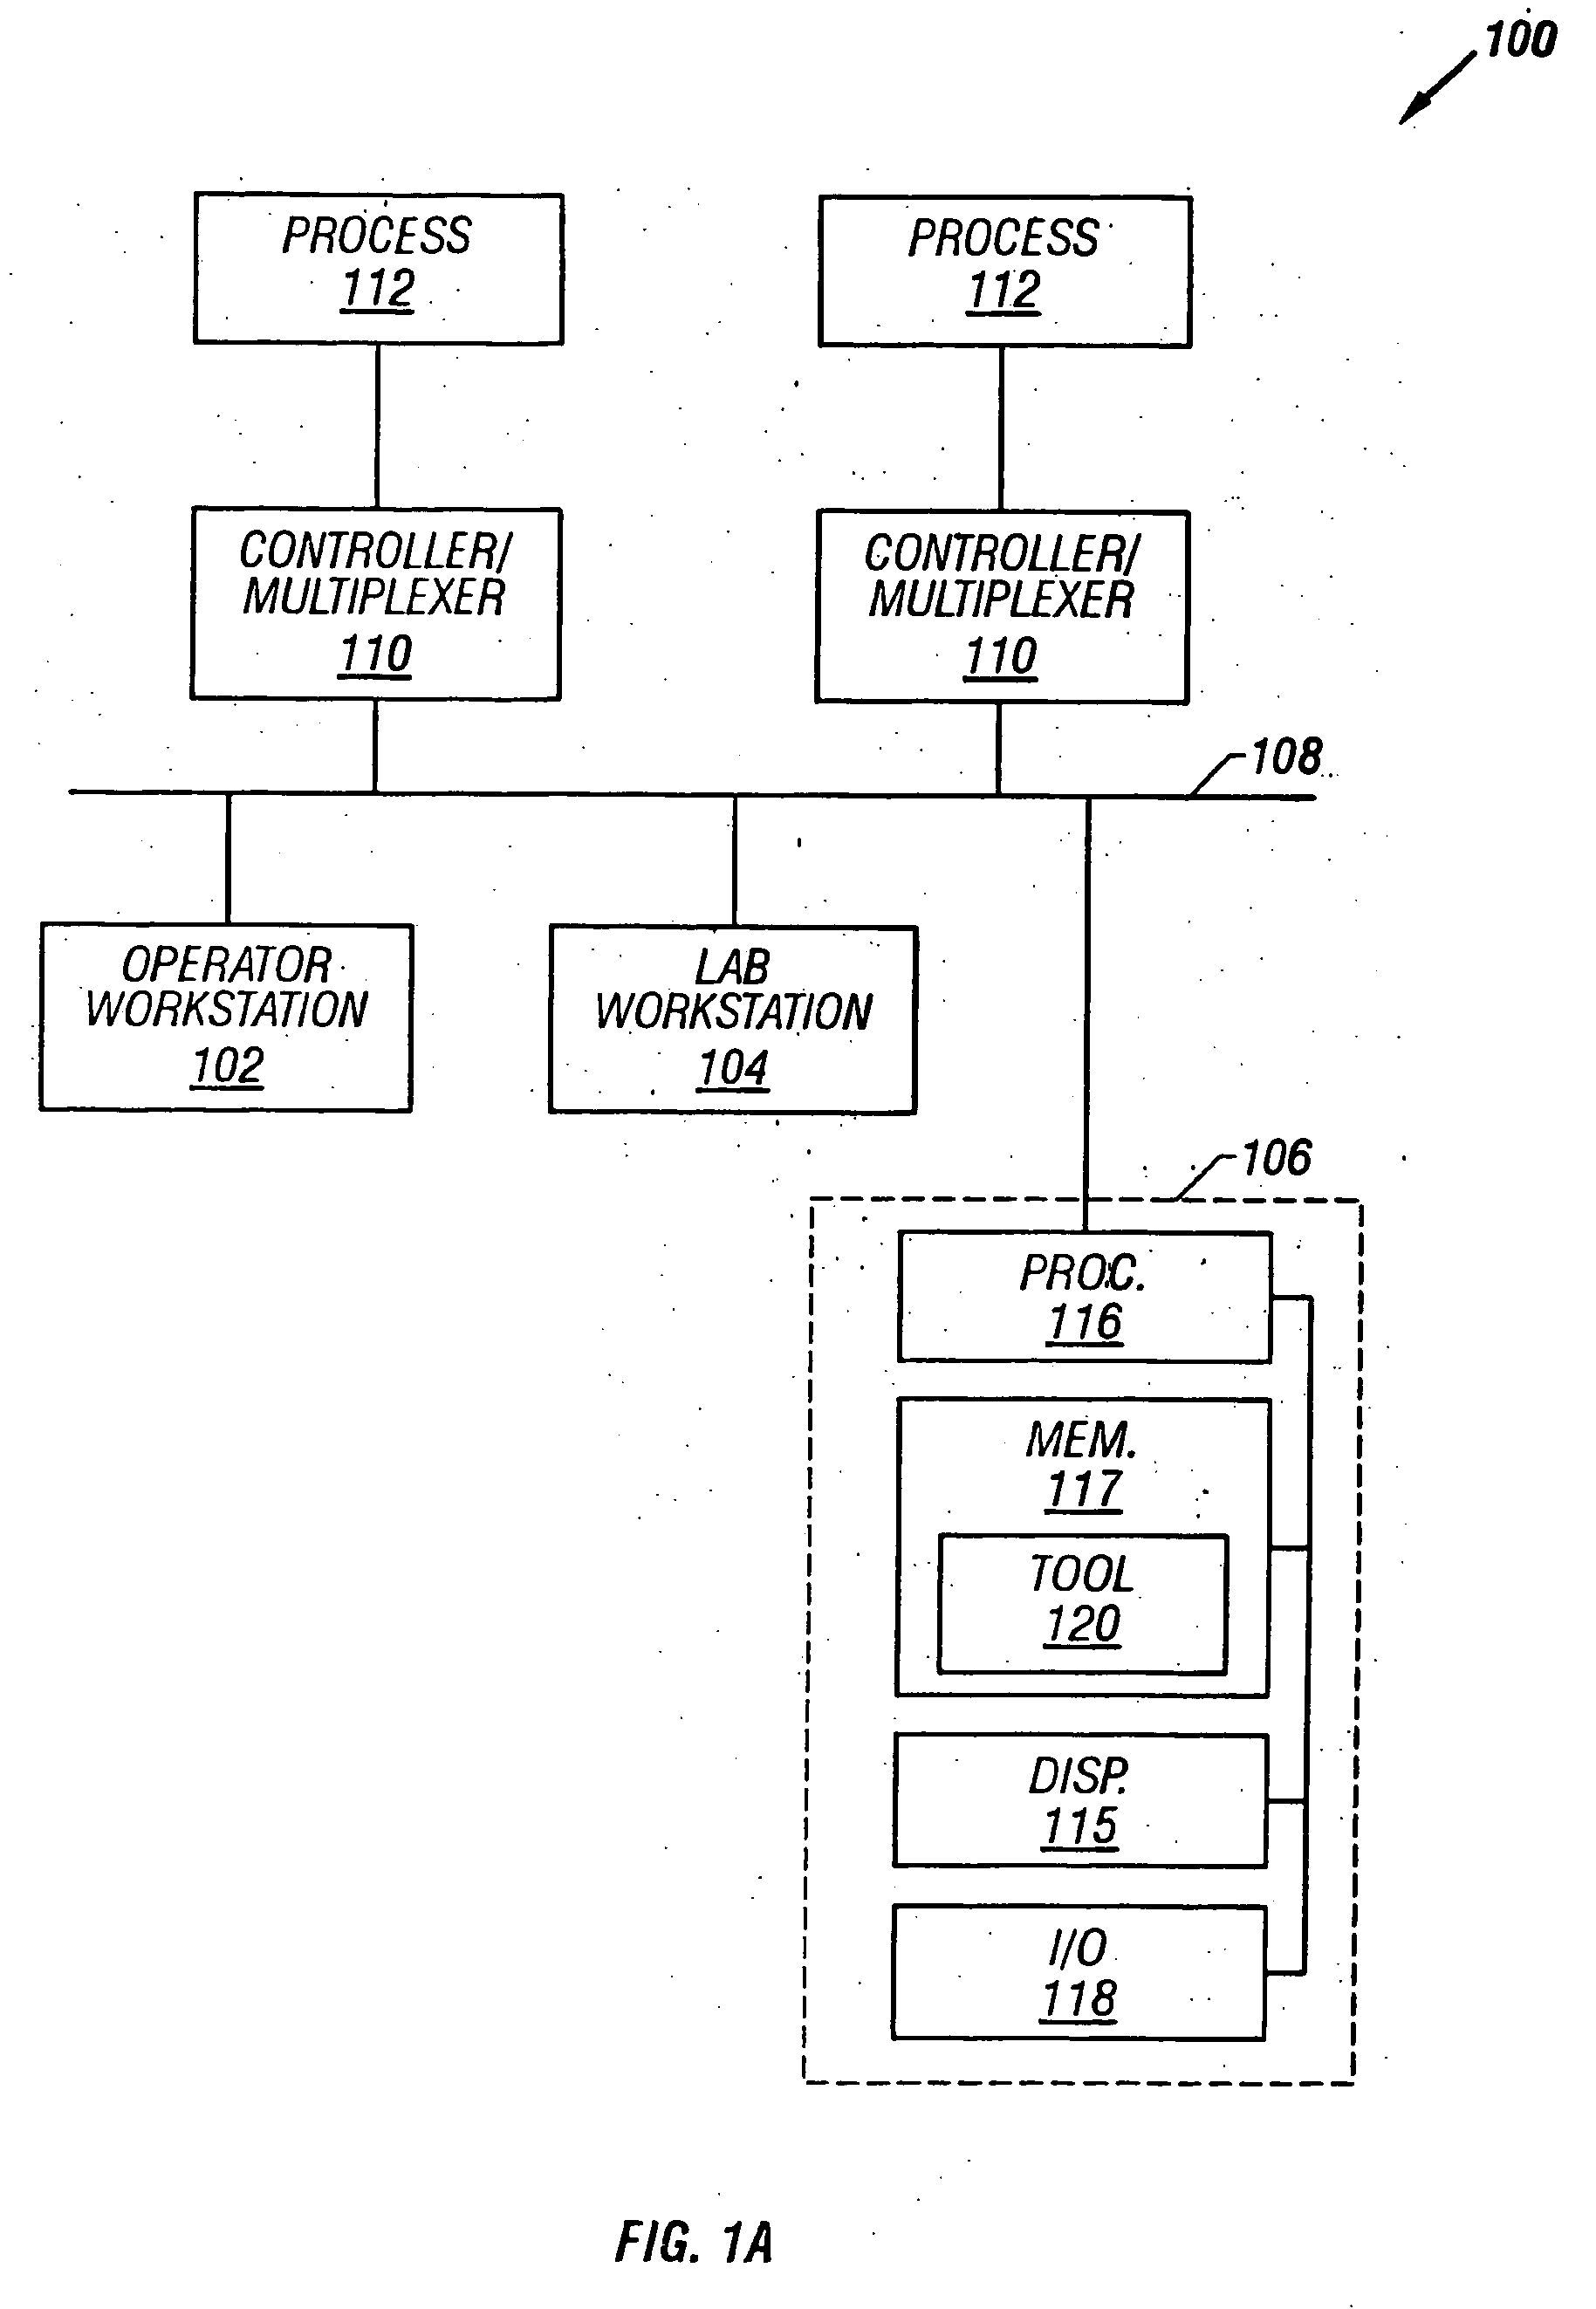 Enhanced tool for managing a process control network